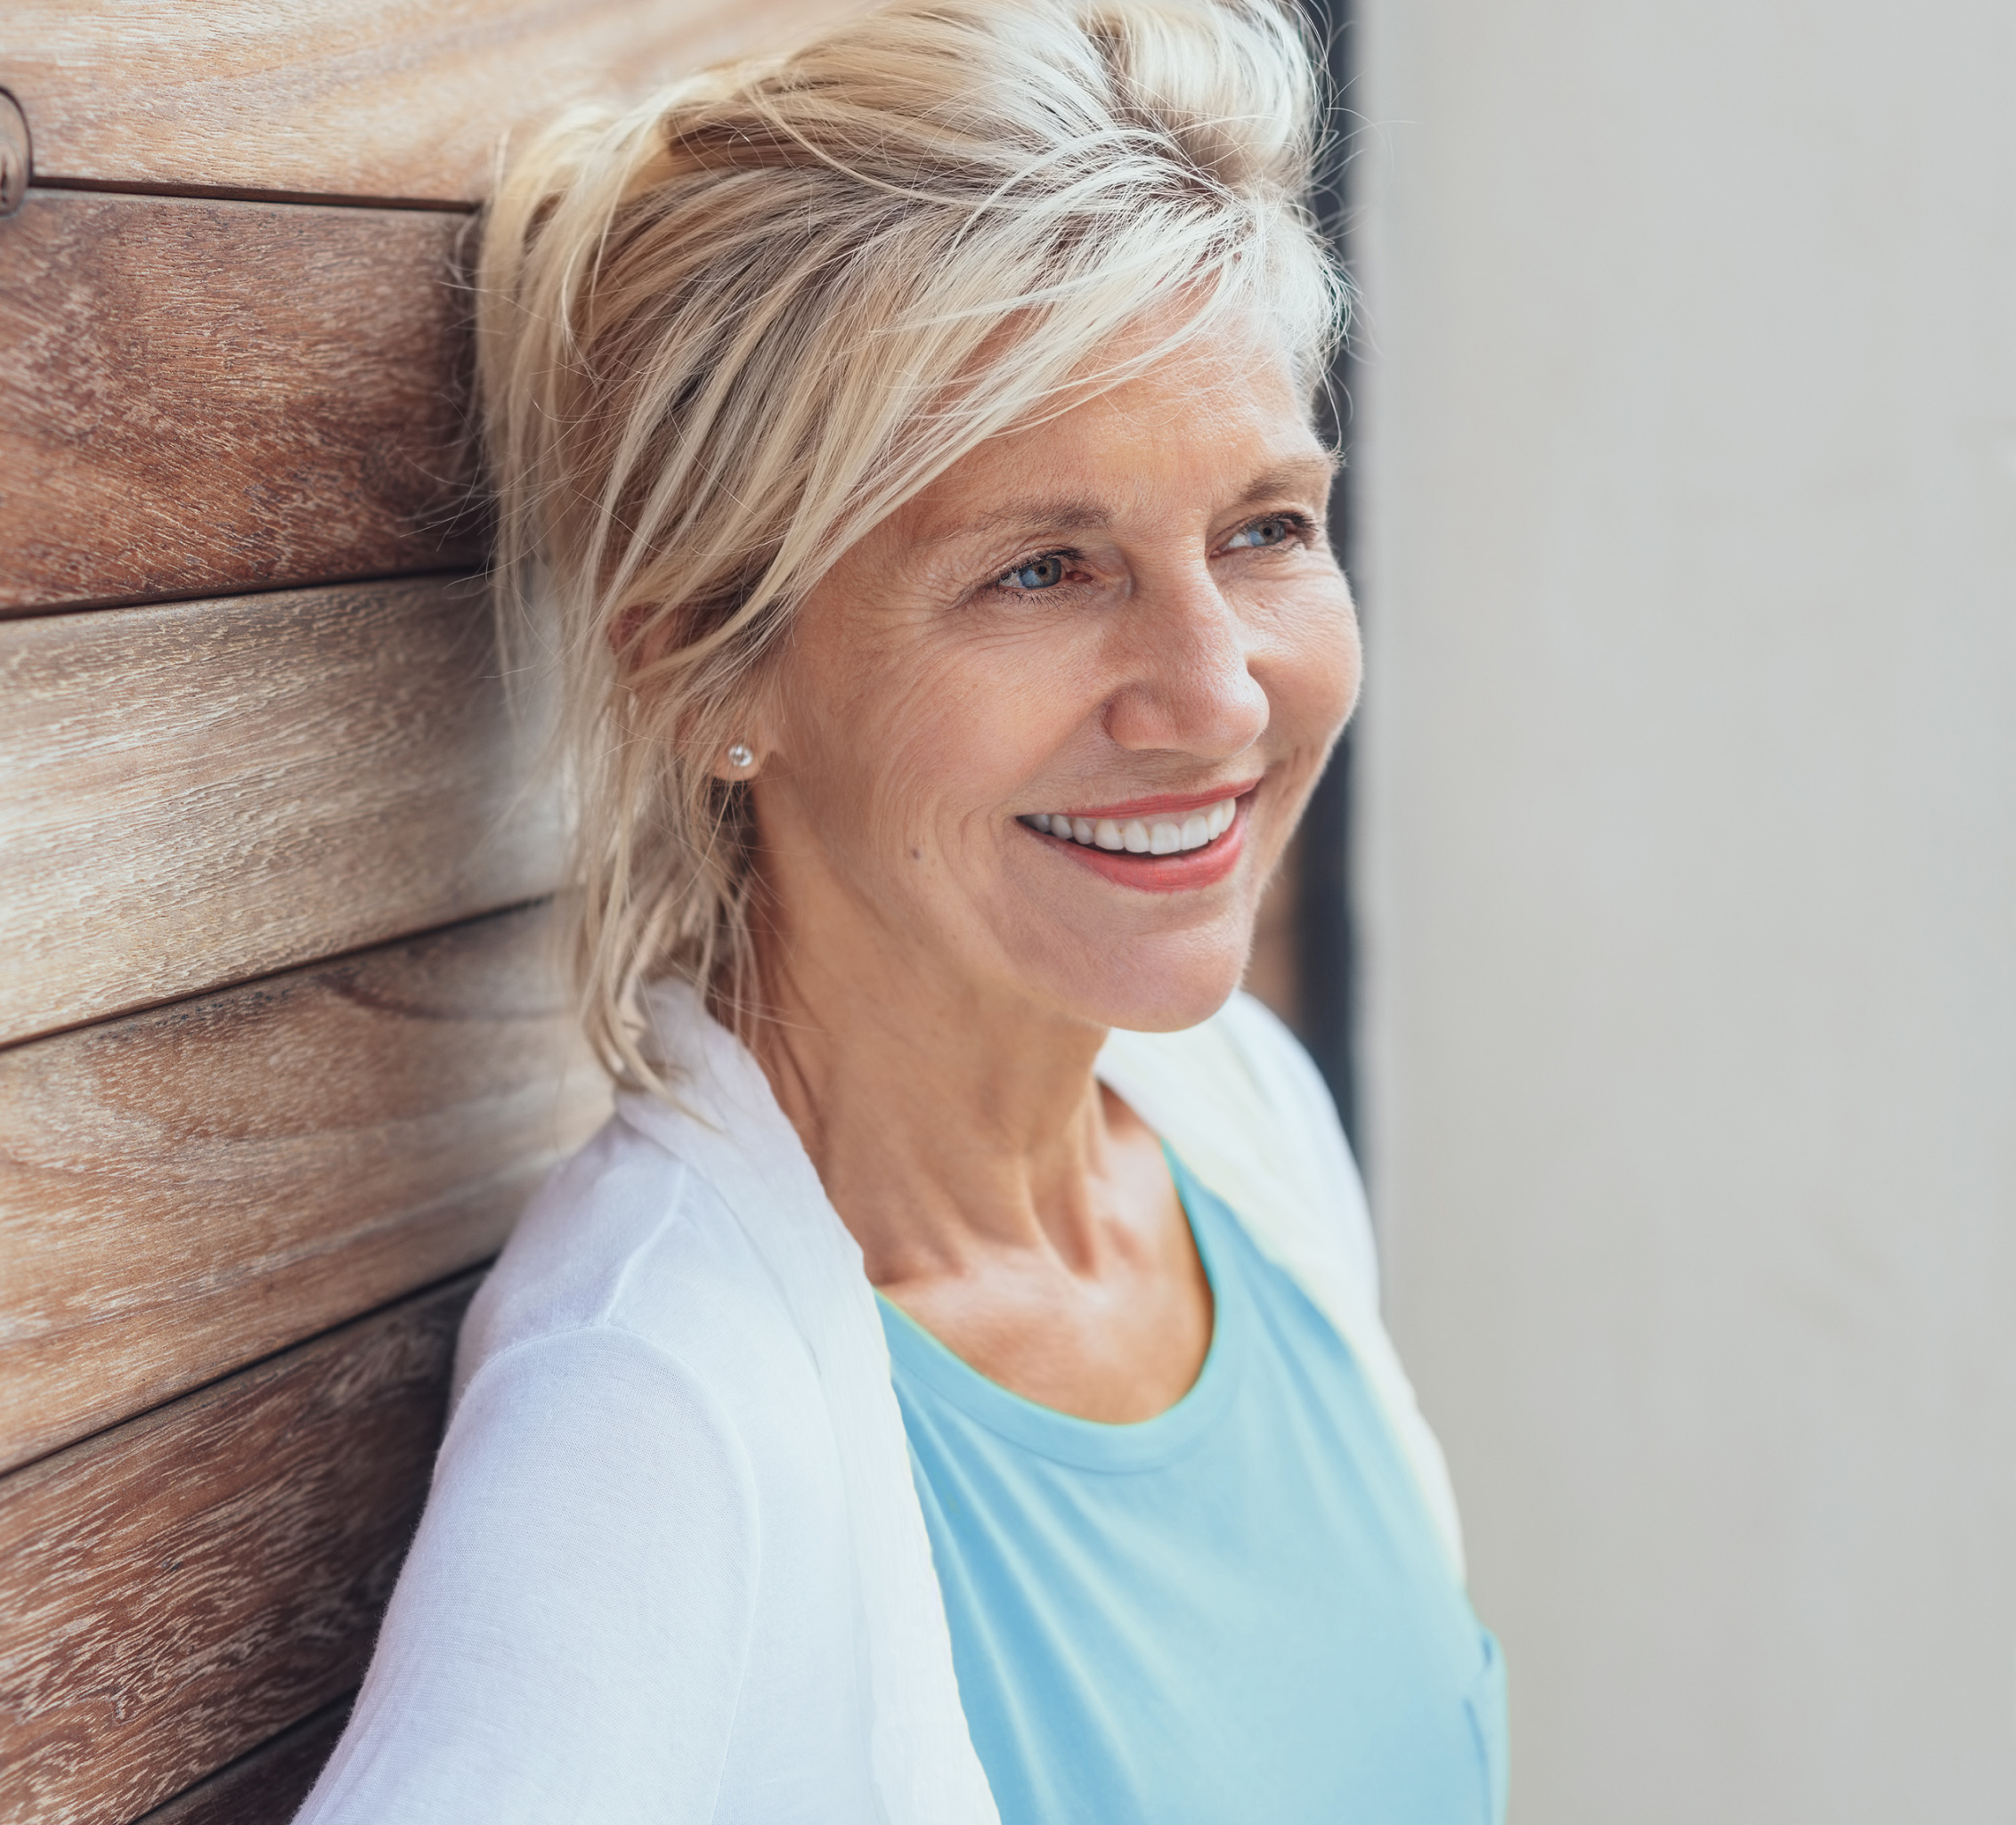 A smiling older woman leans against a wall